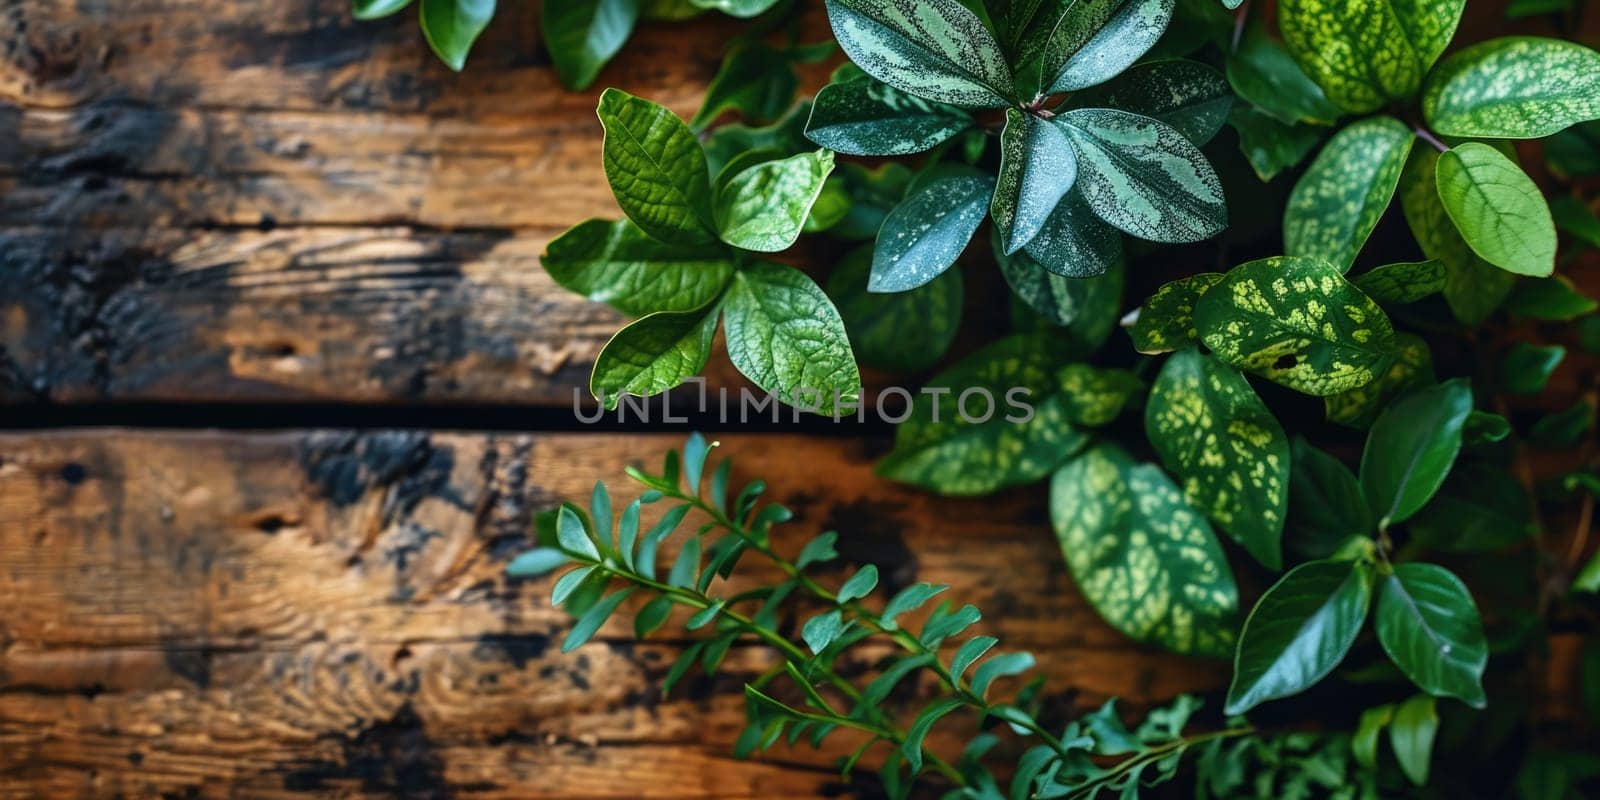 The picture of nature that focused to the green leaf from tree in the forrest that stay on ground and got illuminated with bright light of a sunlight in the summer or spring time of the year. AIGX03.